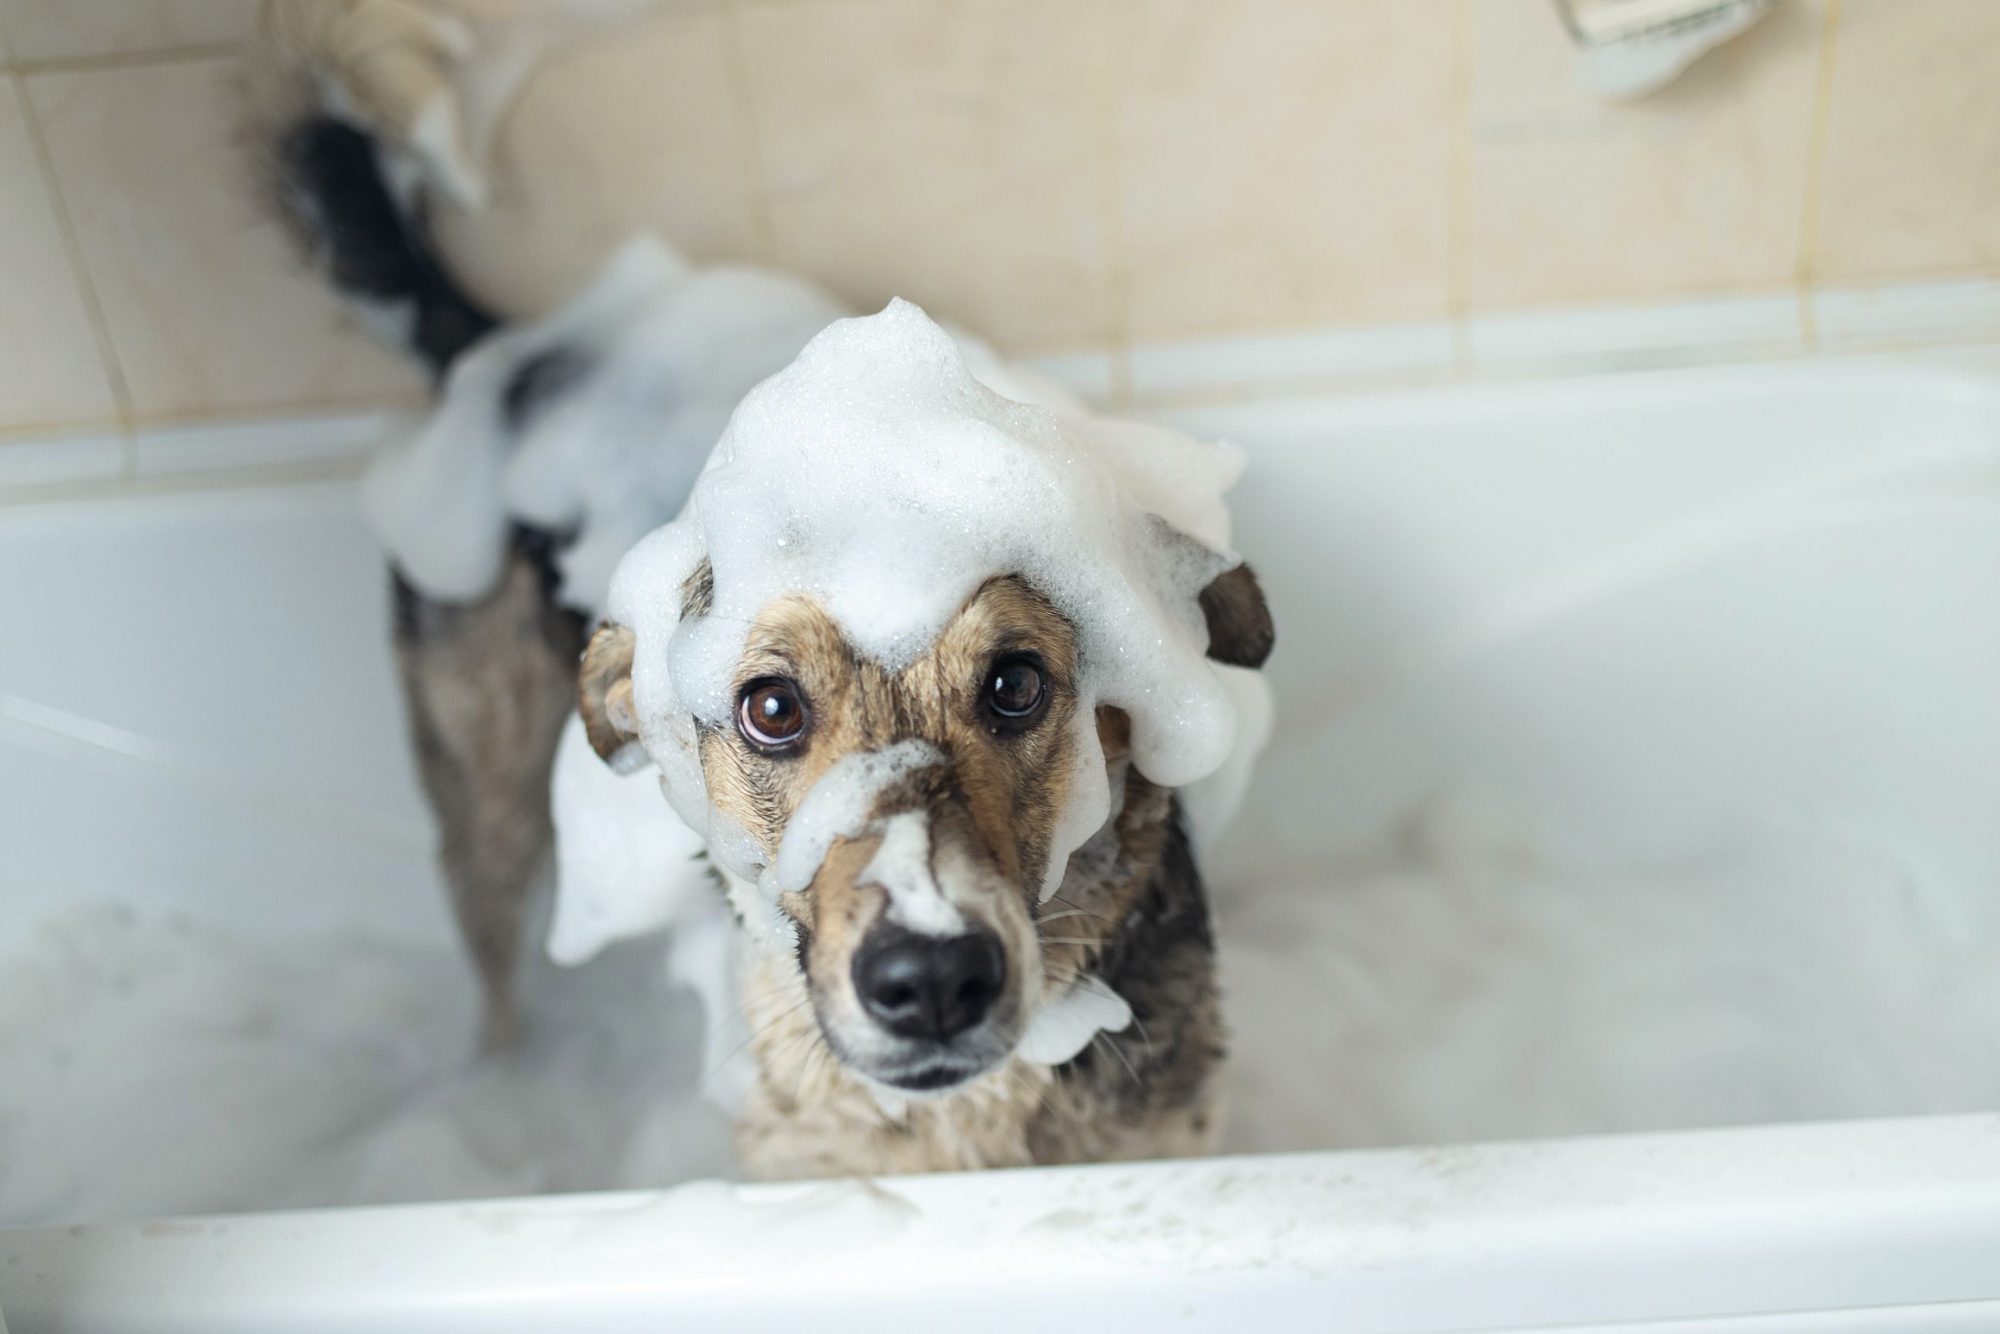 A smelly old dog is taking a bath to help eliminate the odor.